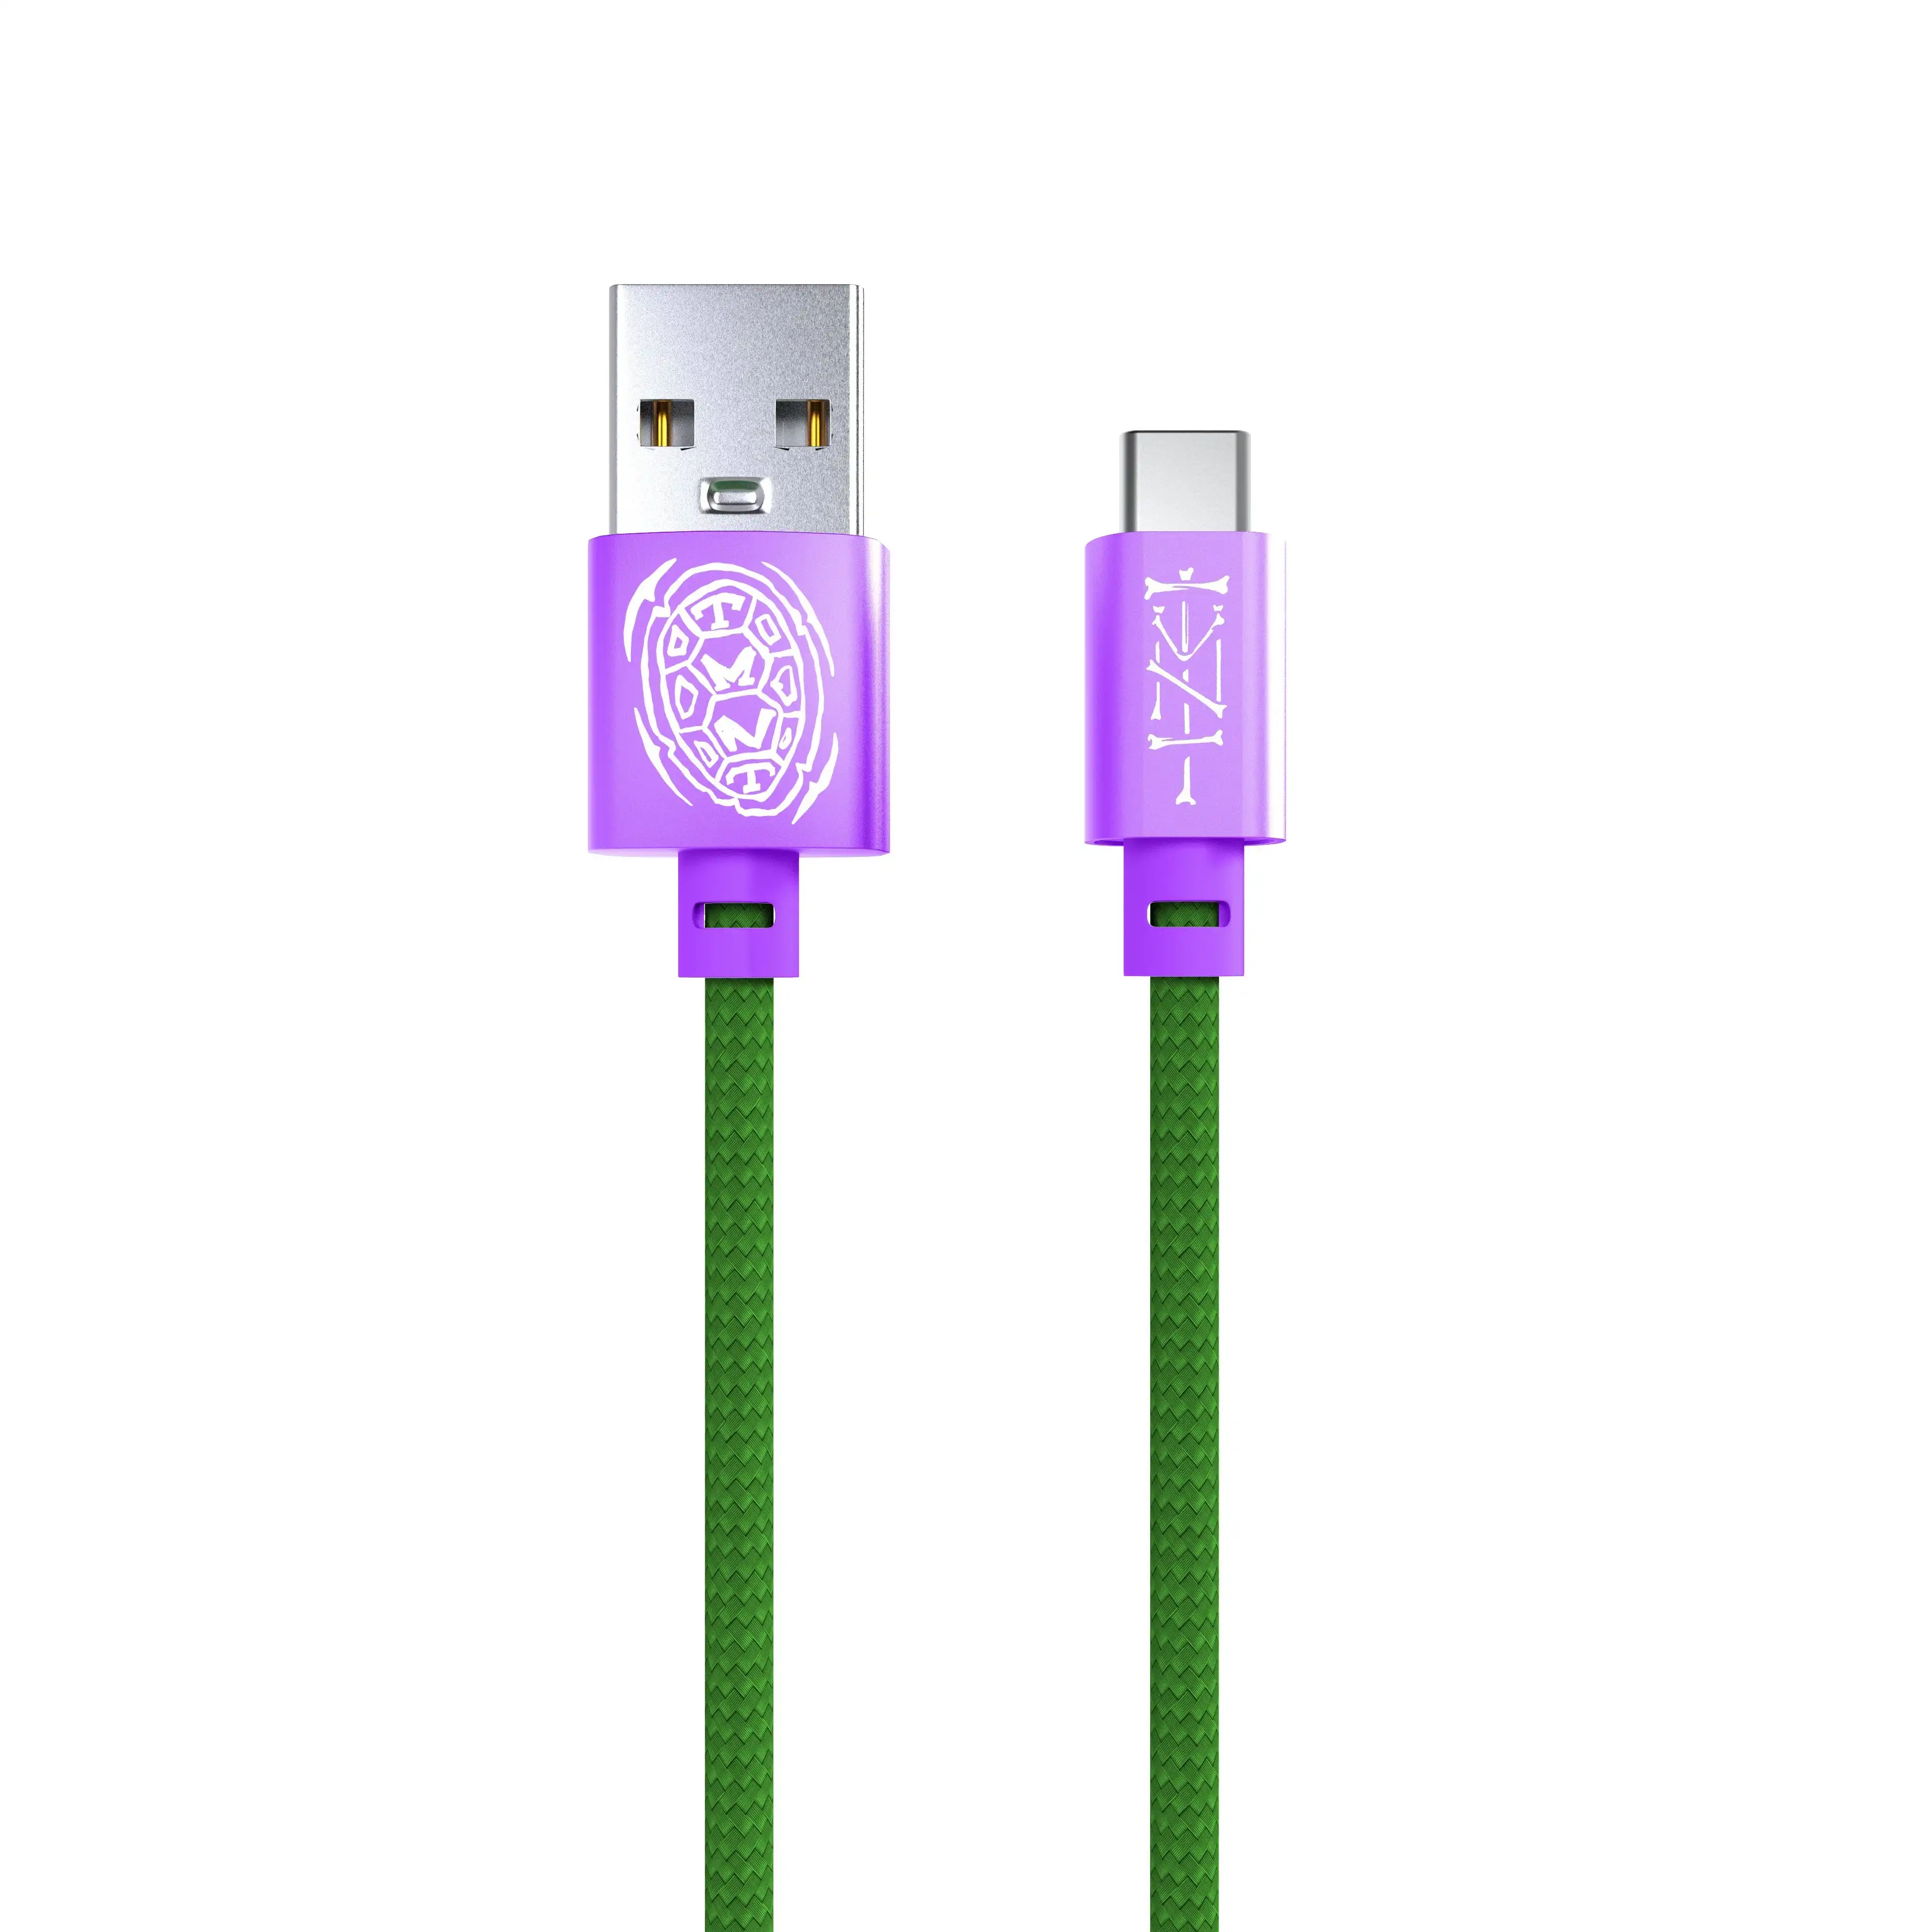 TMNT USB-C to USB-A Cable - 1m, Durable & High-Quality